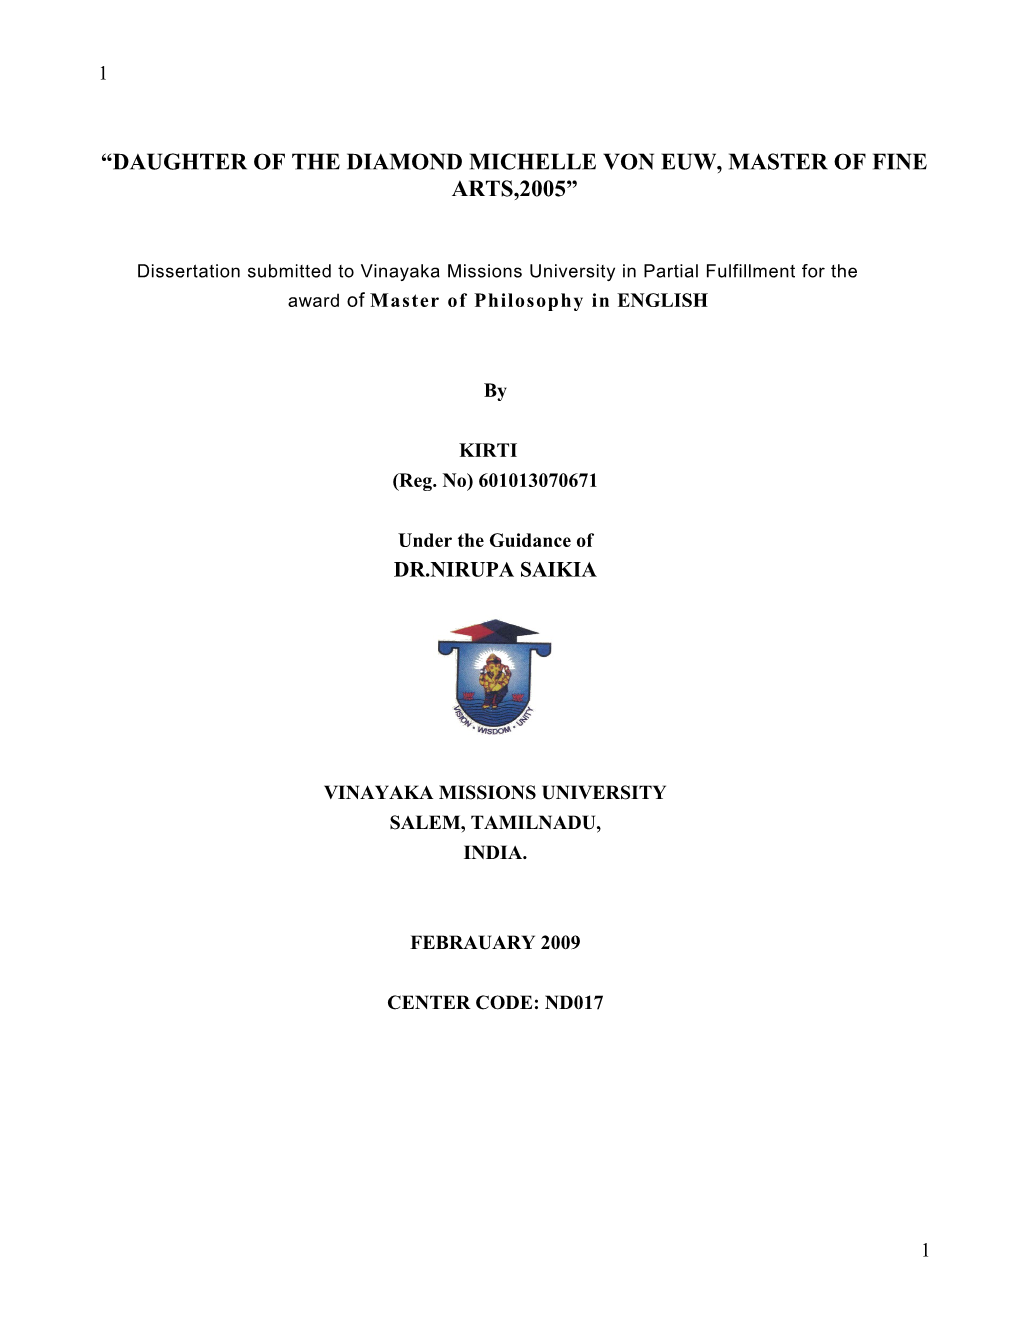 Model Format for Dissertation Front Page